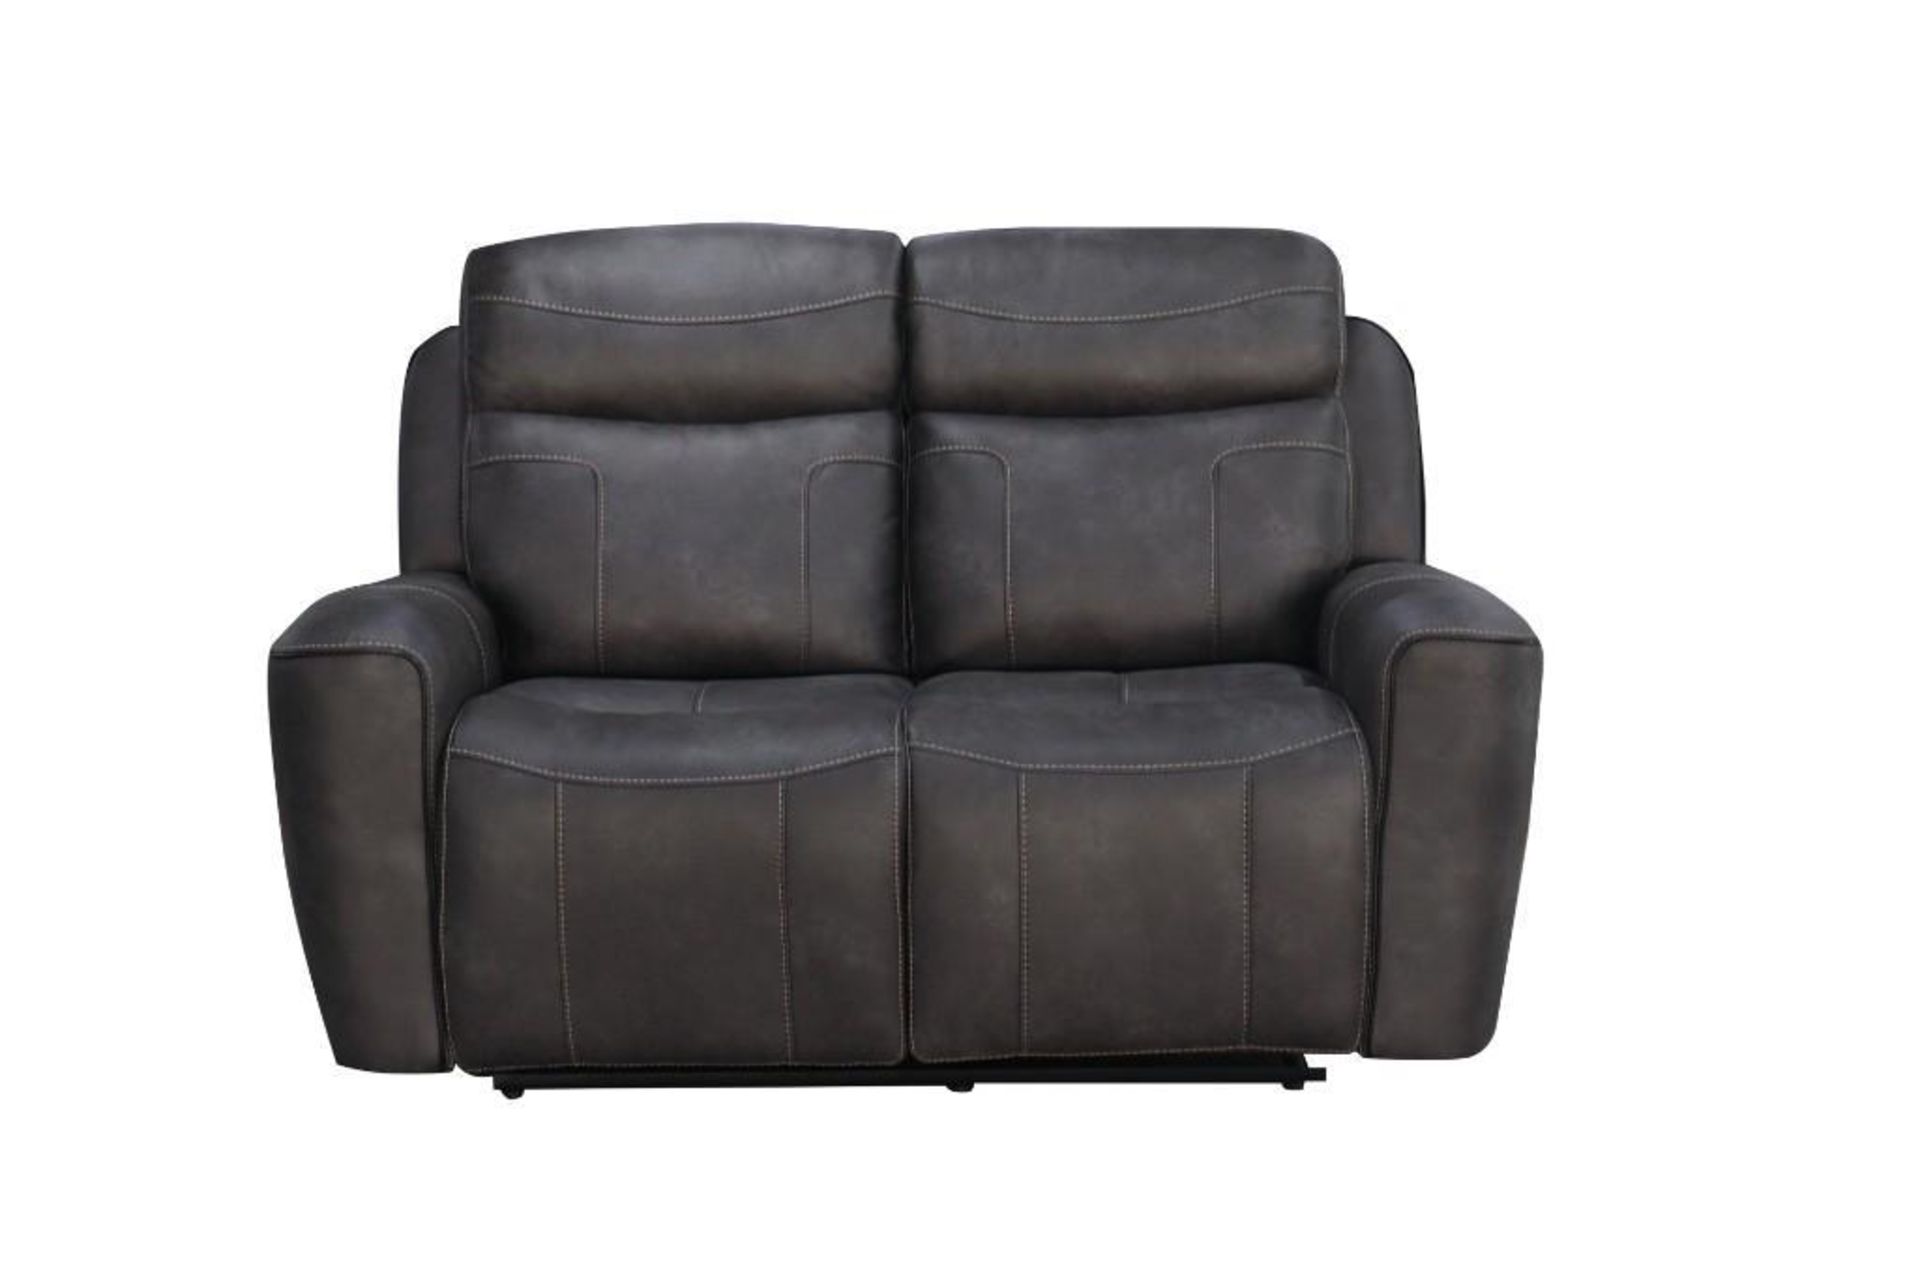 Brand new & Boxed Luxor 2 seater Electric reclining fabric sofa - Image 2 of 3